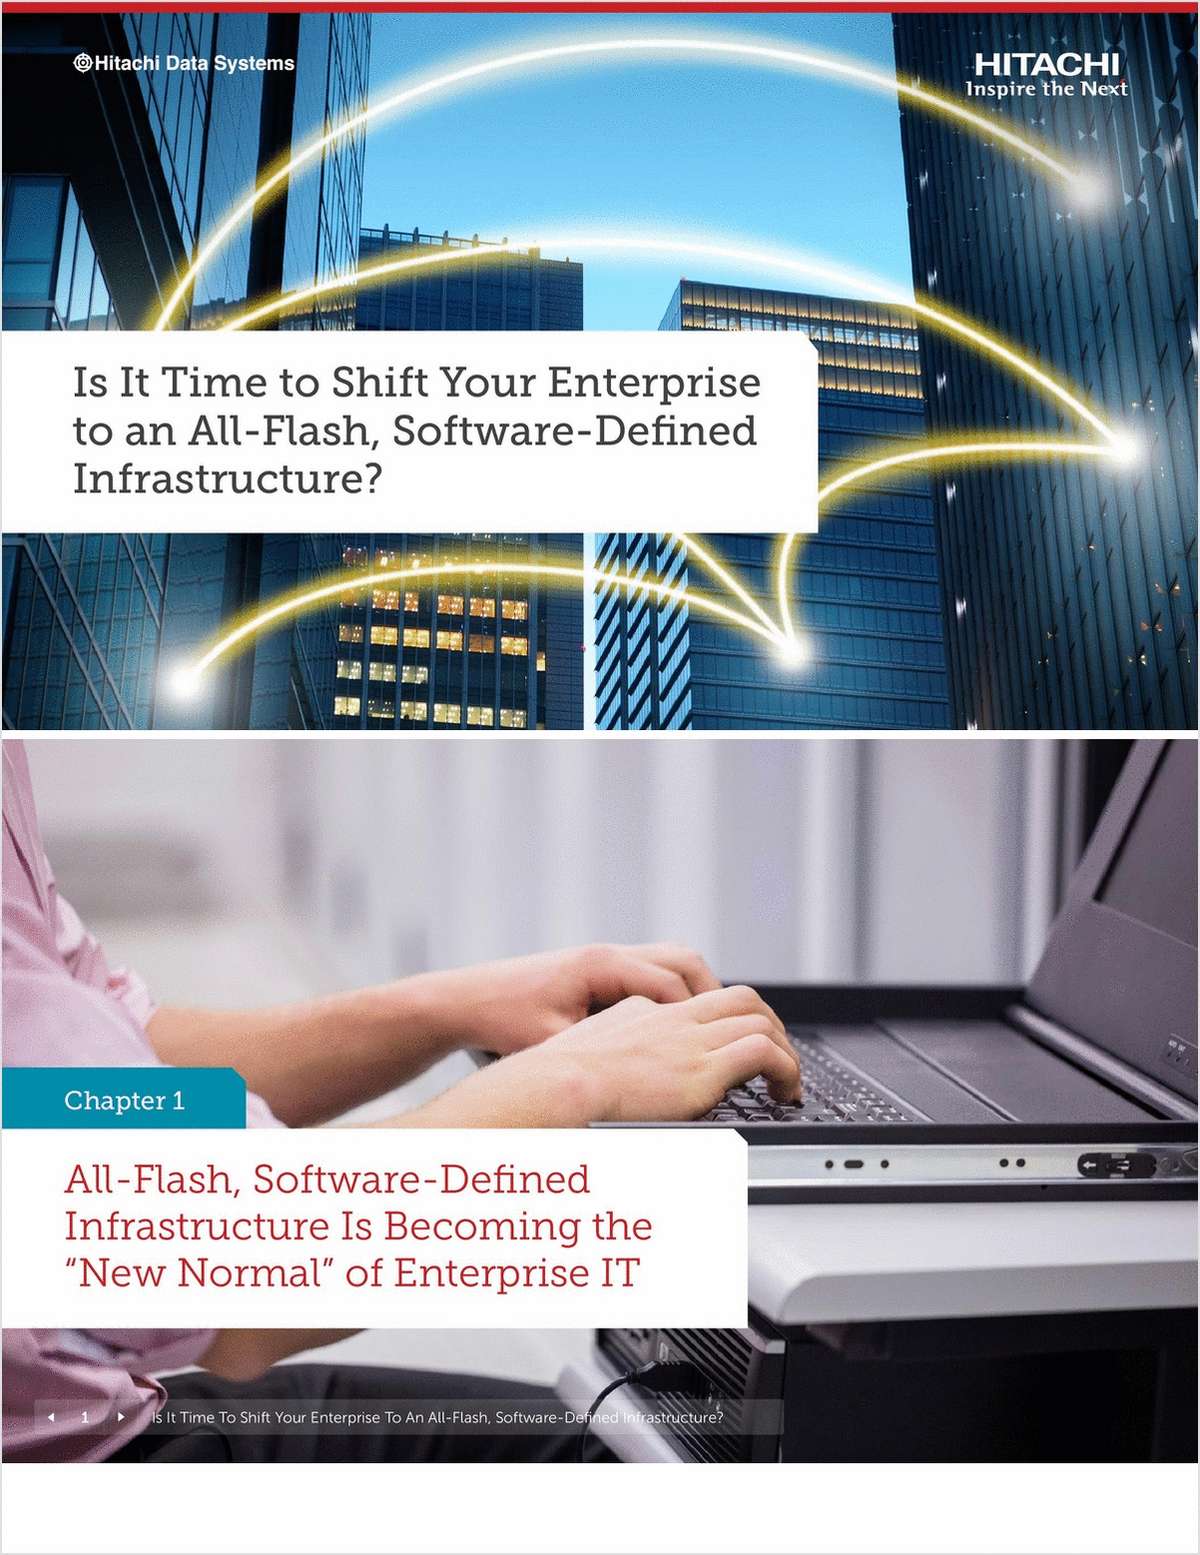 Is It Time to Shift Your Enterprise to an All-Flash, Software-Defined Infrastructure?